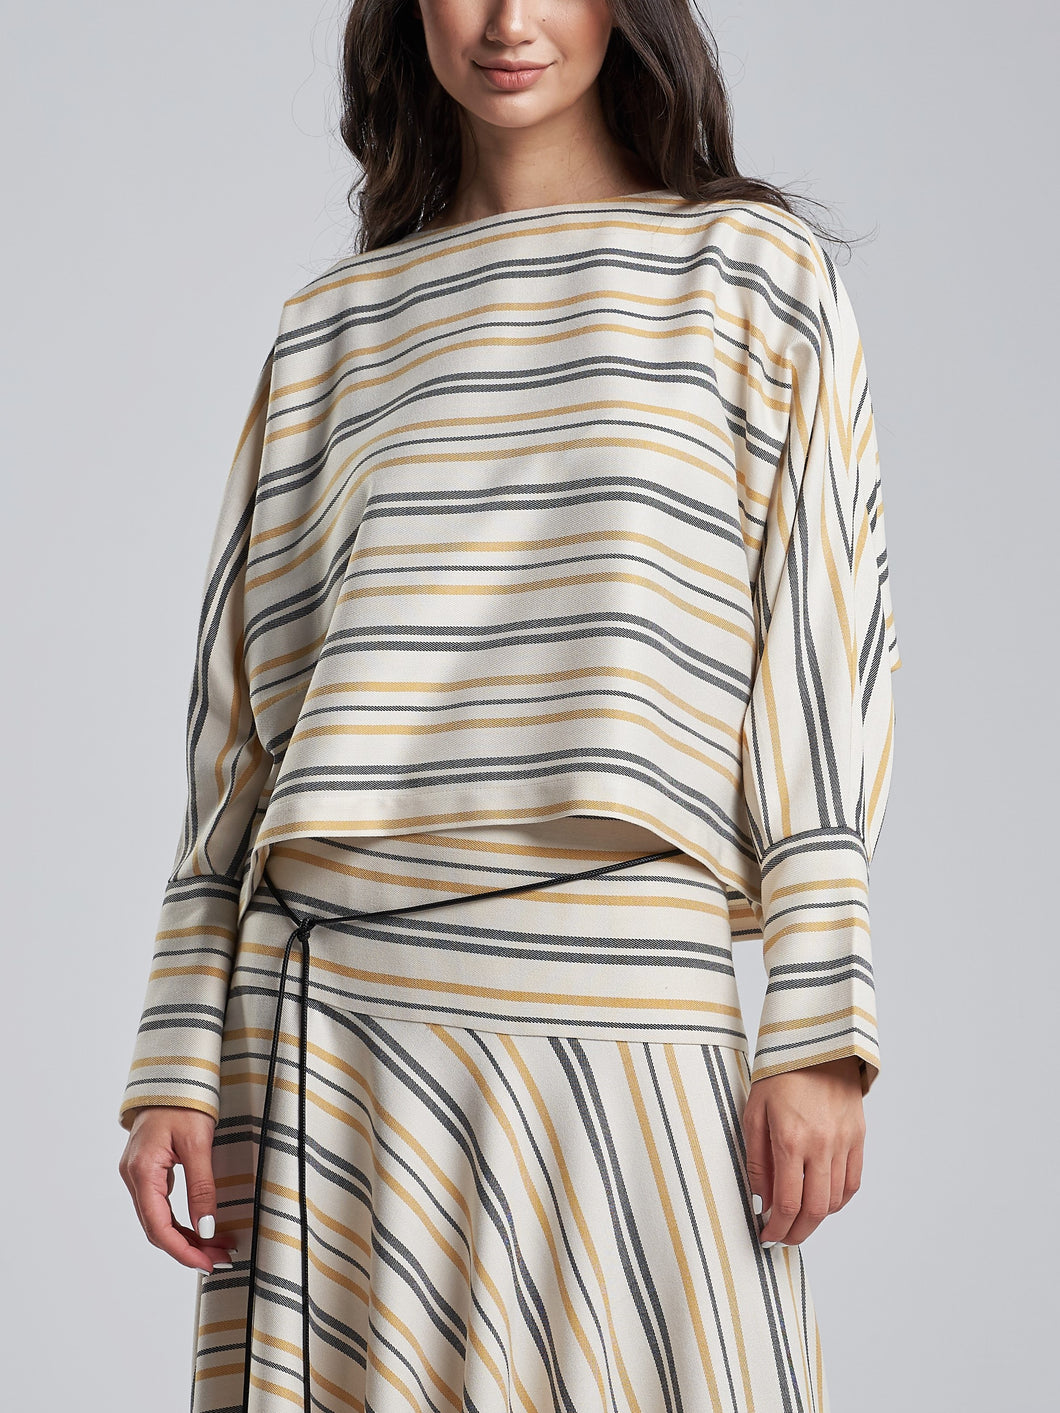 Oversized Tuscan Yellow Striped top